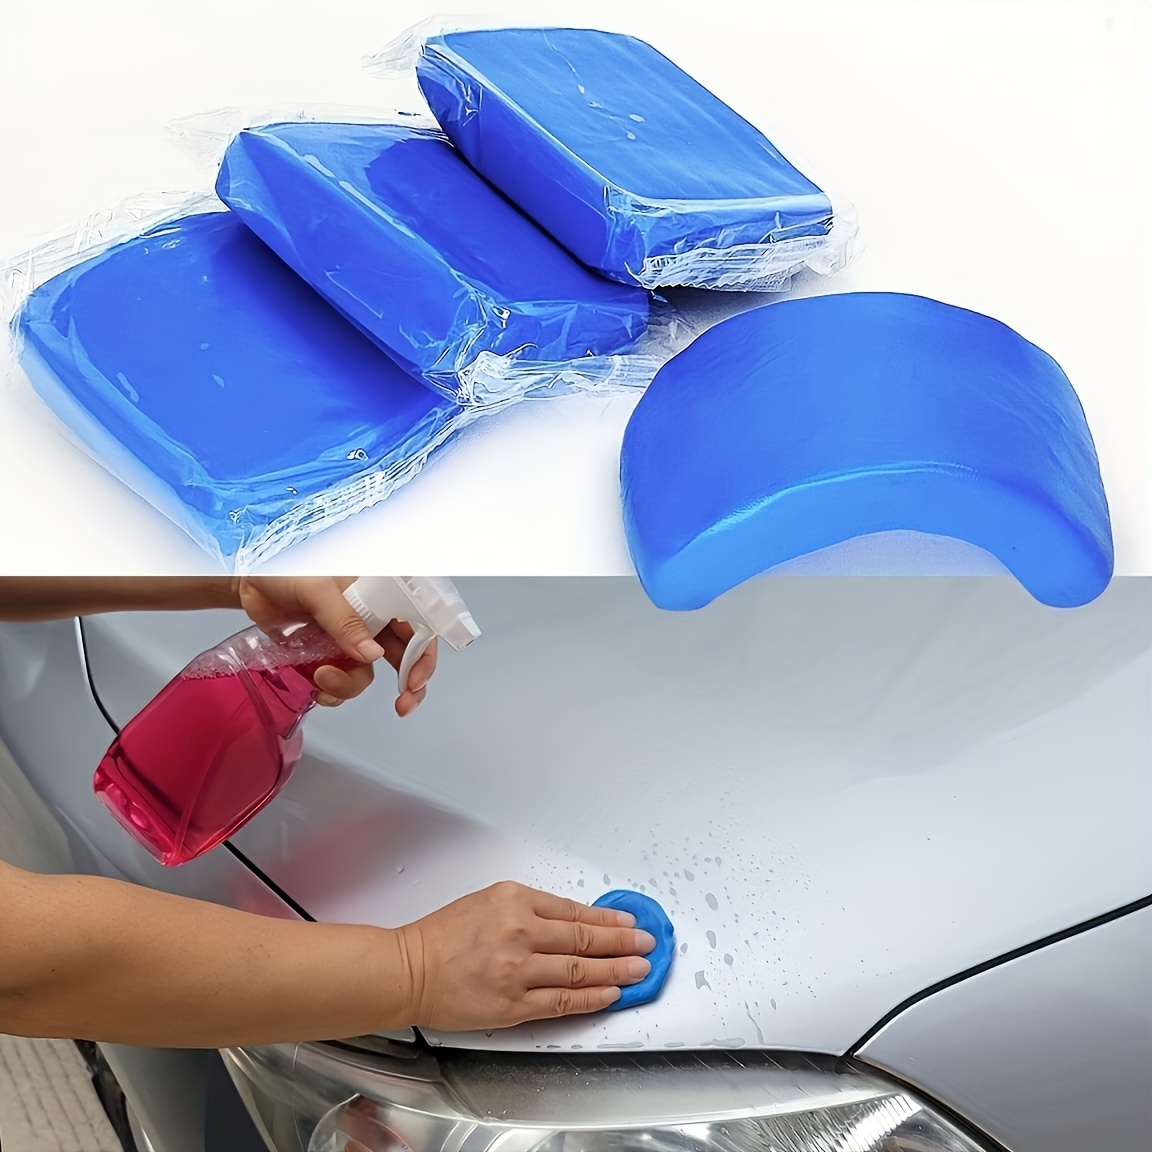 2pcs Clay Bar Car Detailing Clay,2 X180g Auto Magic Clay Bar With Cleaning  And Adsorption Capacity For Car, Glassblue